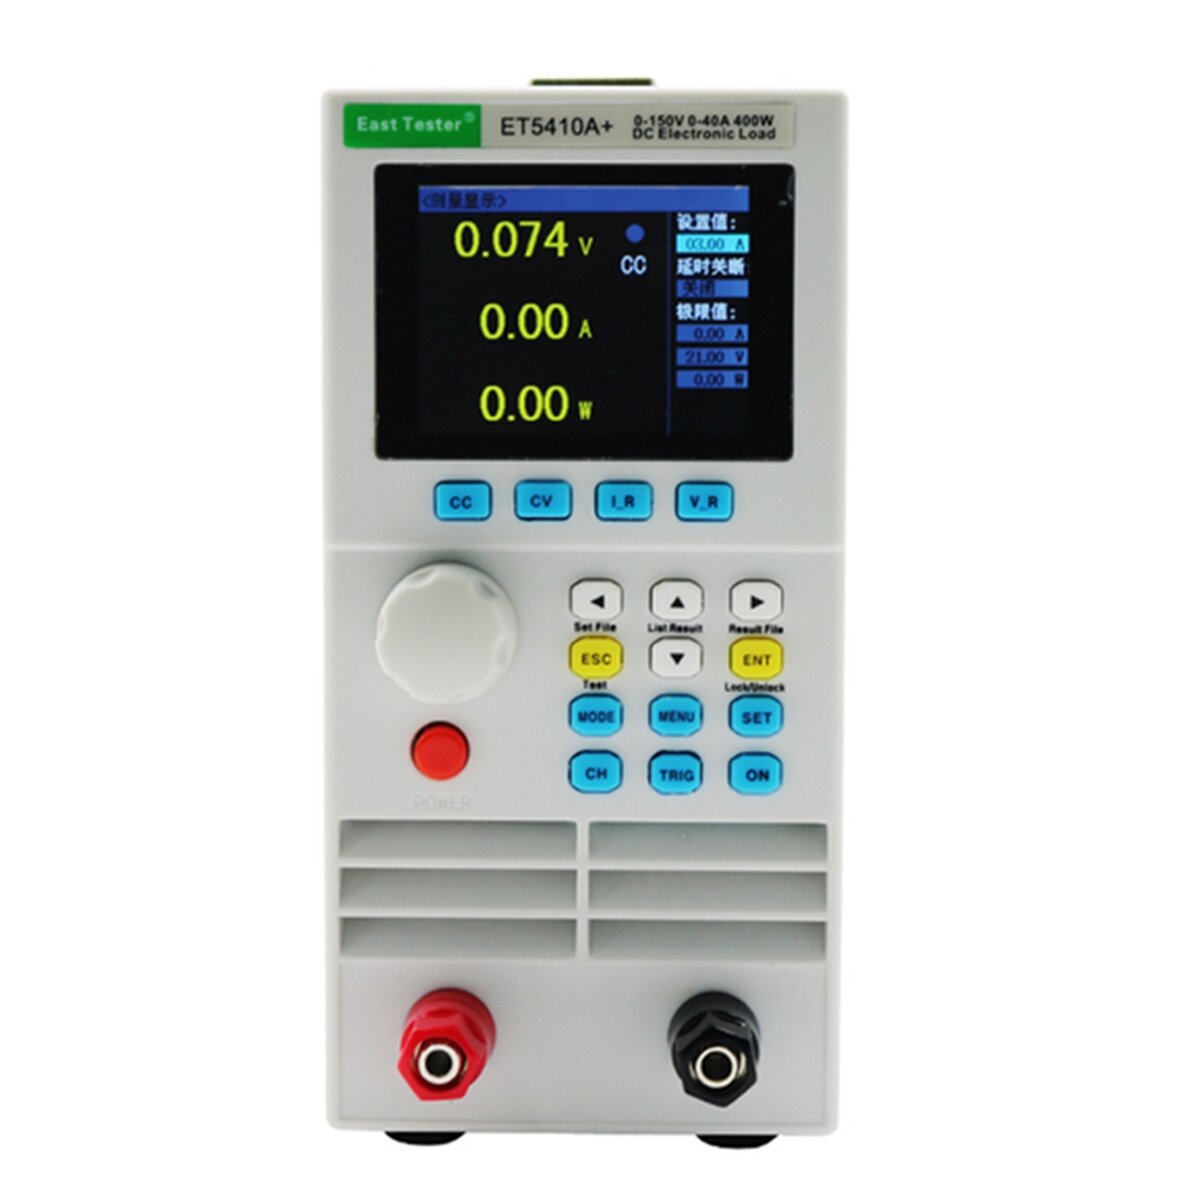 ET5410A+ Programmable DC Electronic Load Digital Control Load Electronic Battery Tester Load Meter